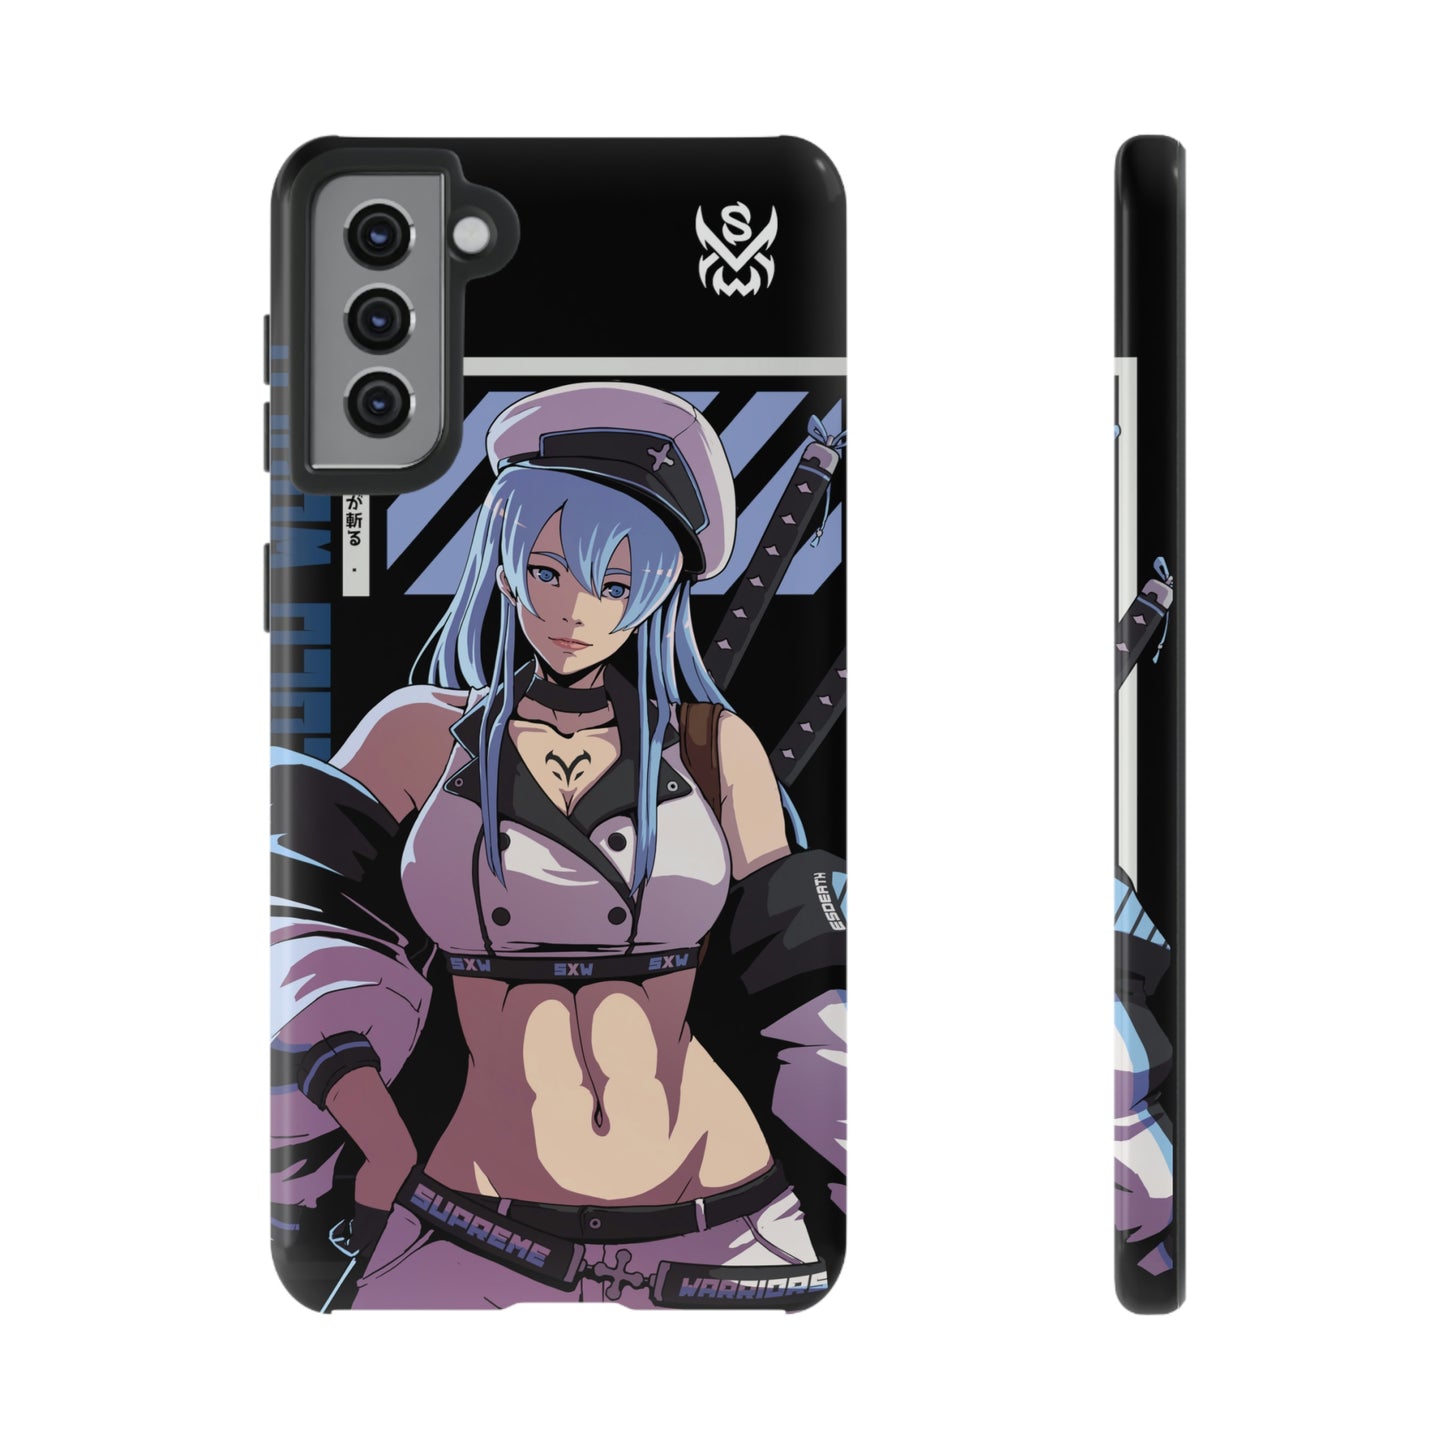 Cold World / Samsung Galaxy Phone Case - LIMITED